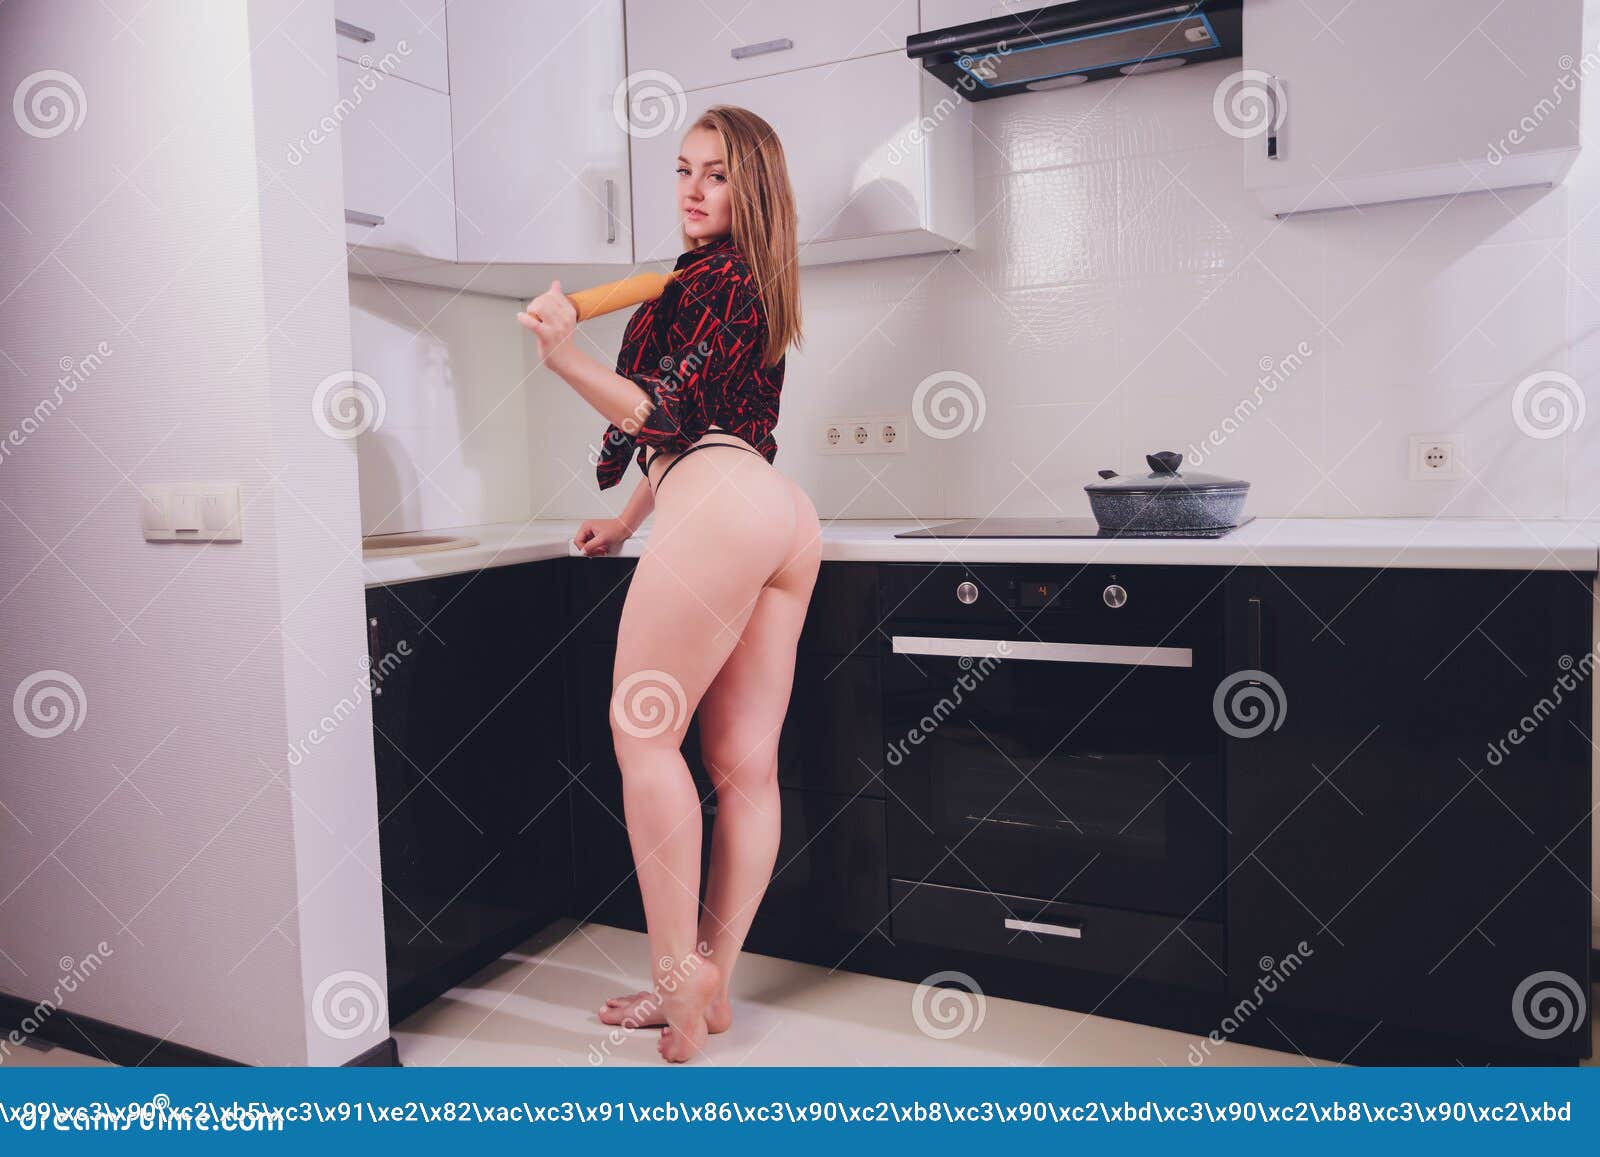 Woman cooking who are naked